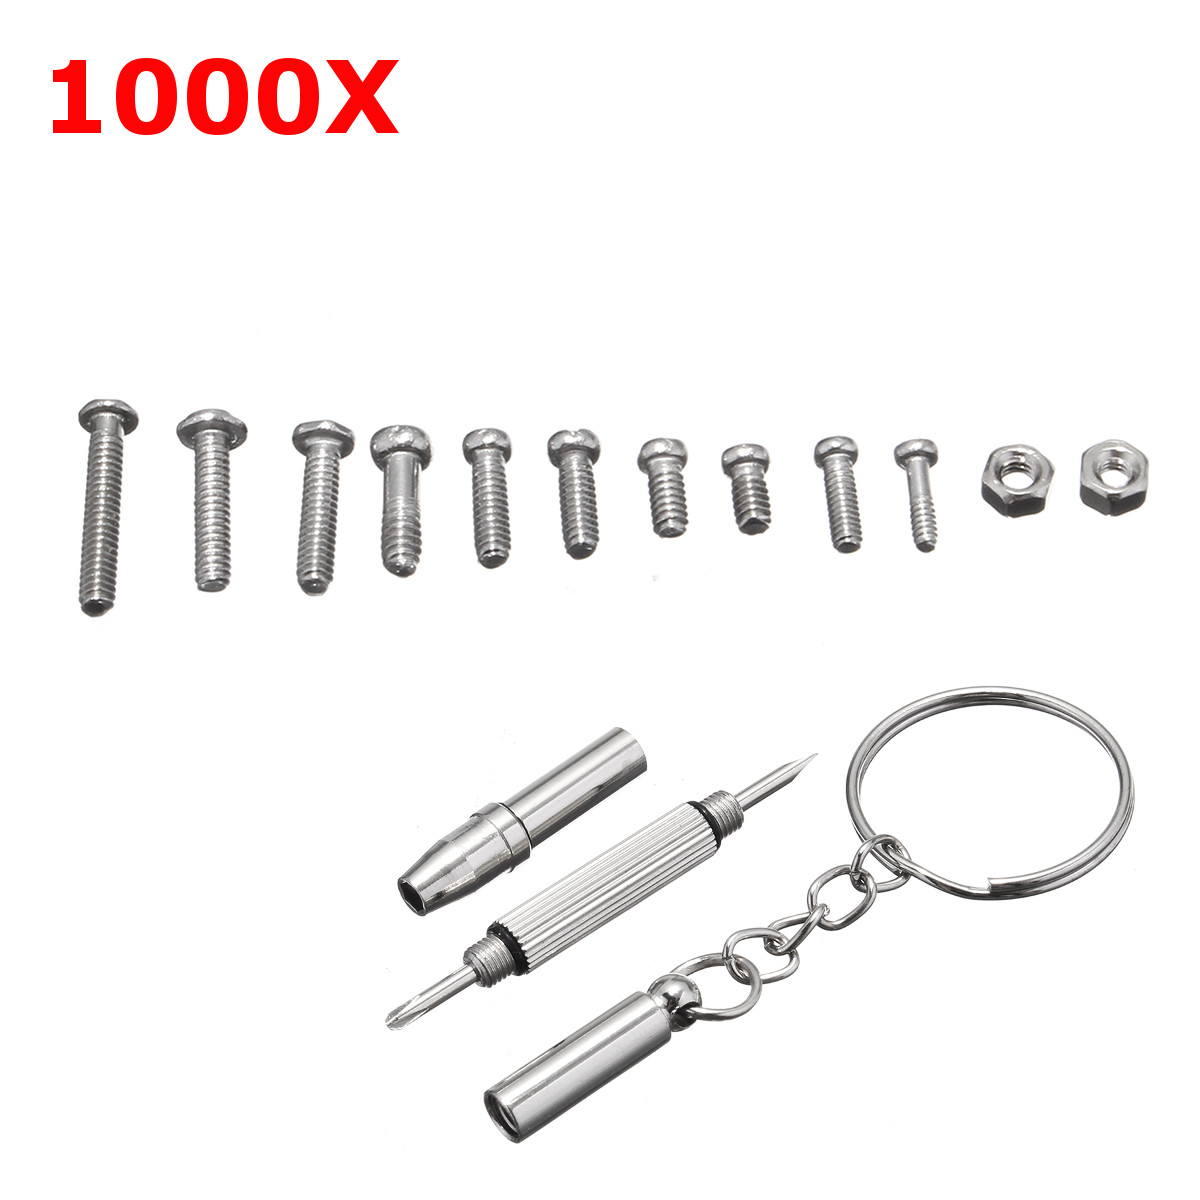 1000Pcs-Micro-Tiny-Screws-Nut-Repair-Kit-with-Tools-for-Eyeglasses-Sunglass-Spectacles-1166803